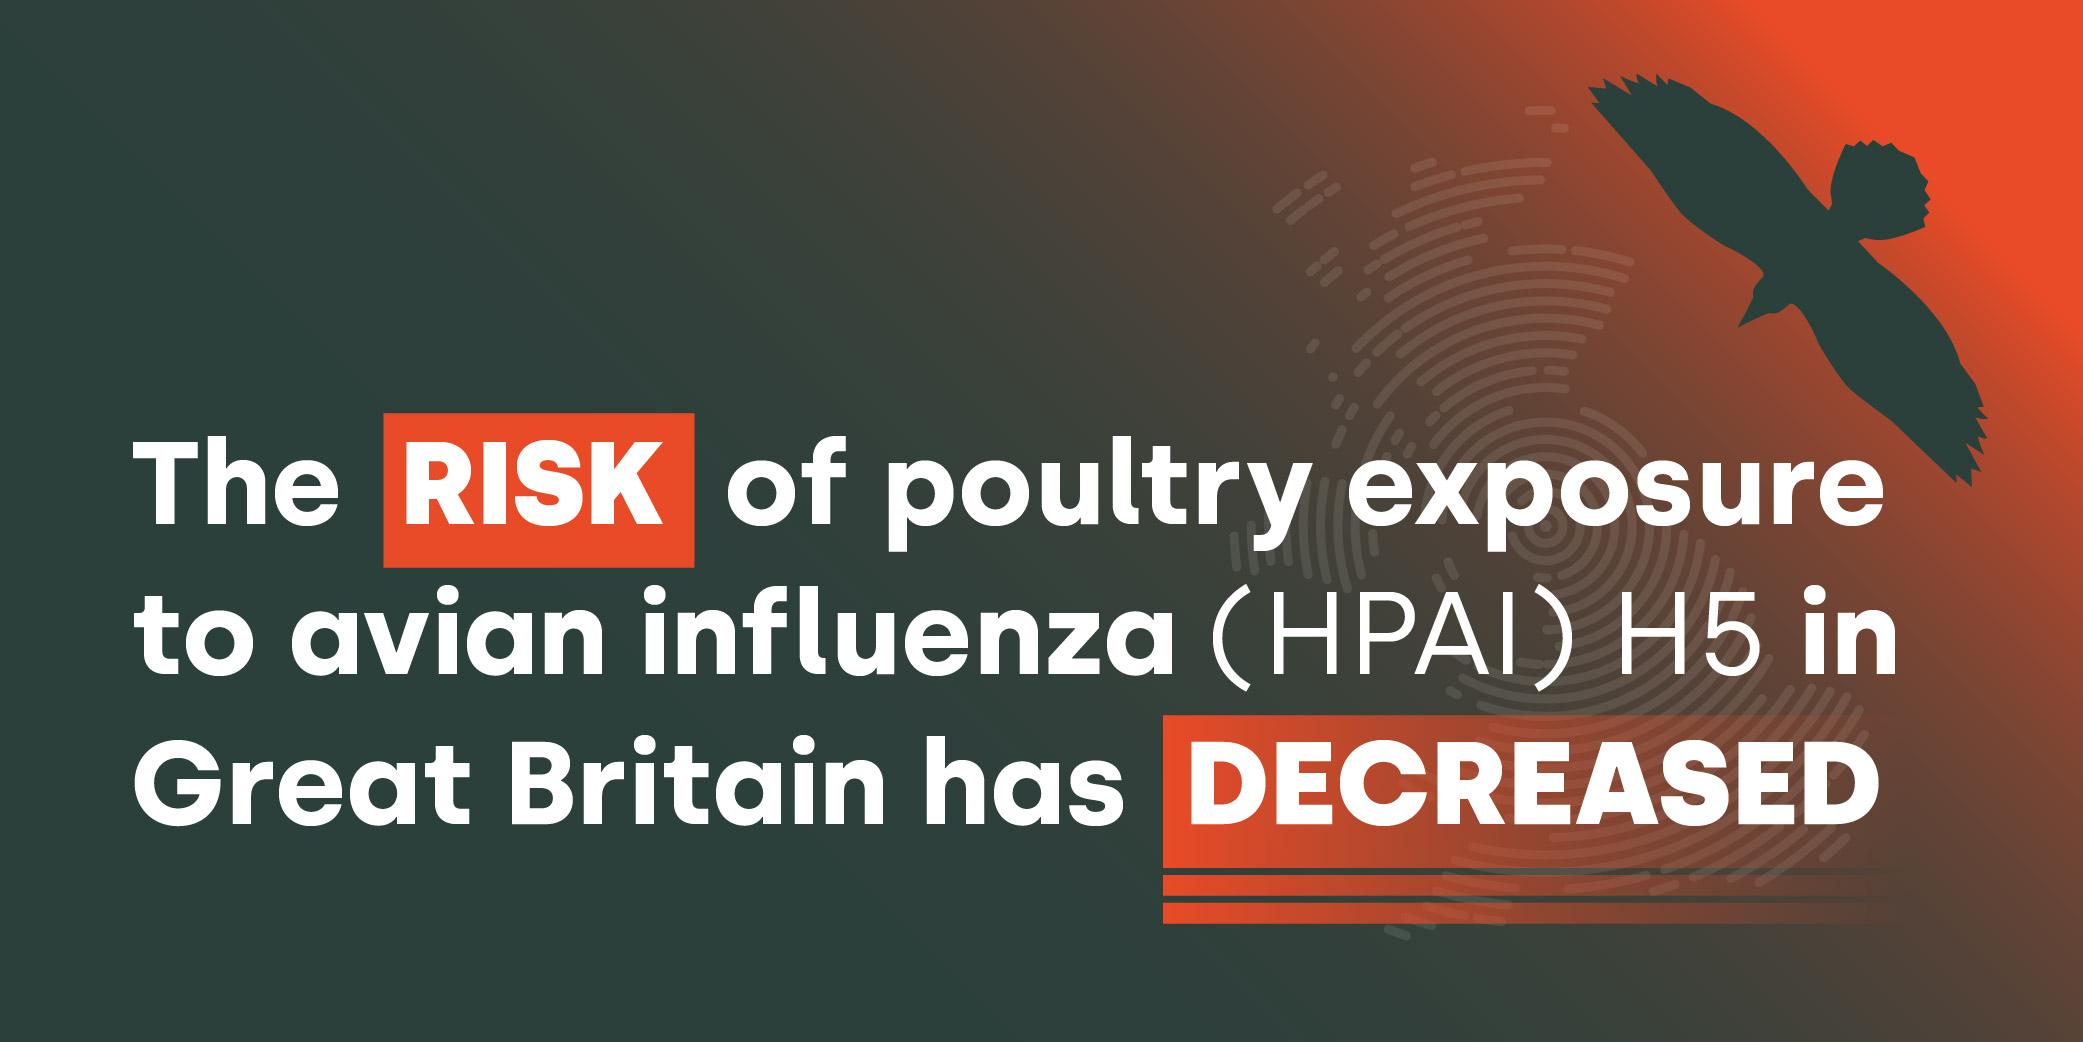 The risk of poultry exposure to AI (HPAI) H5 in GB has decreased